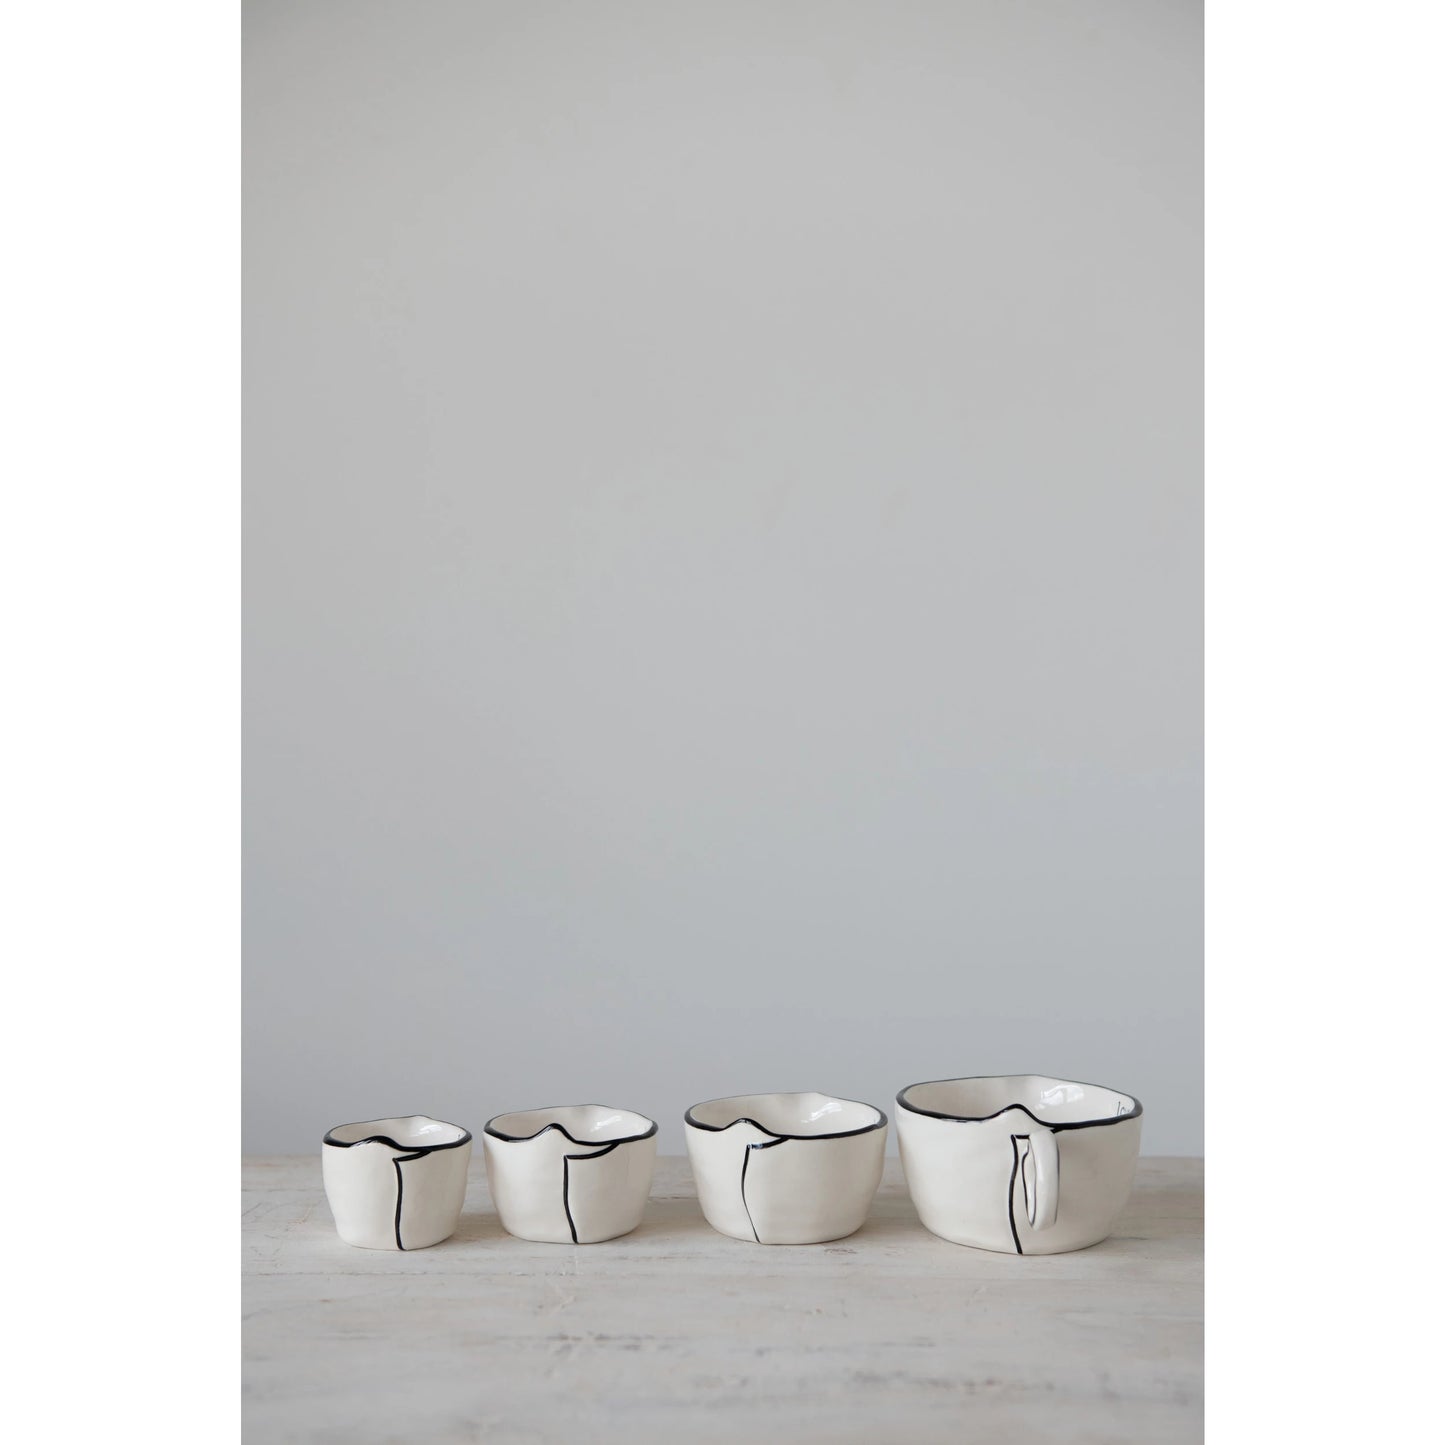 Stoneware Measuring Cups, The Feathered Farmhouse